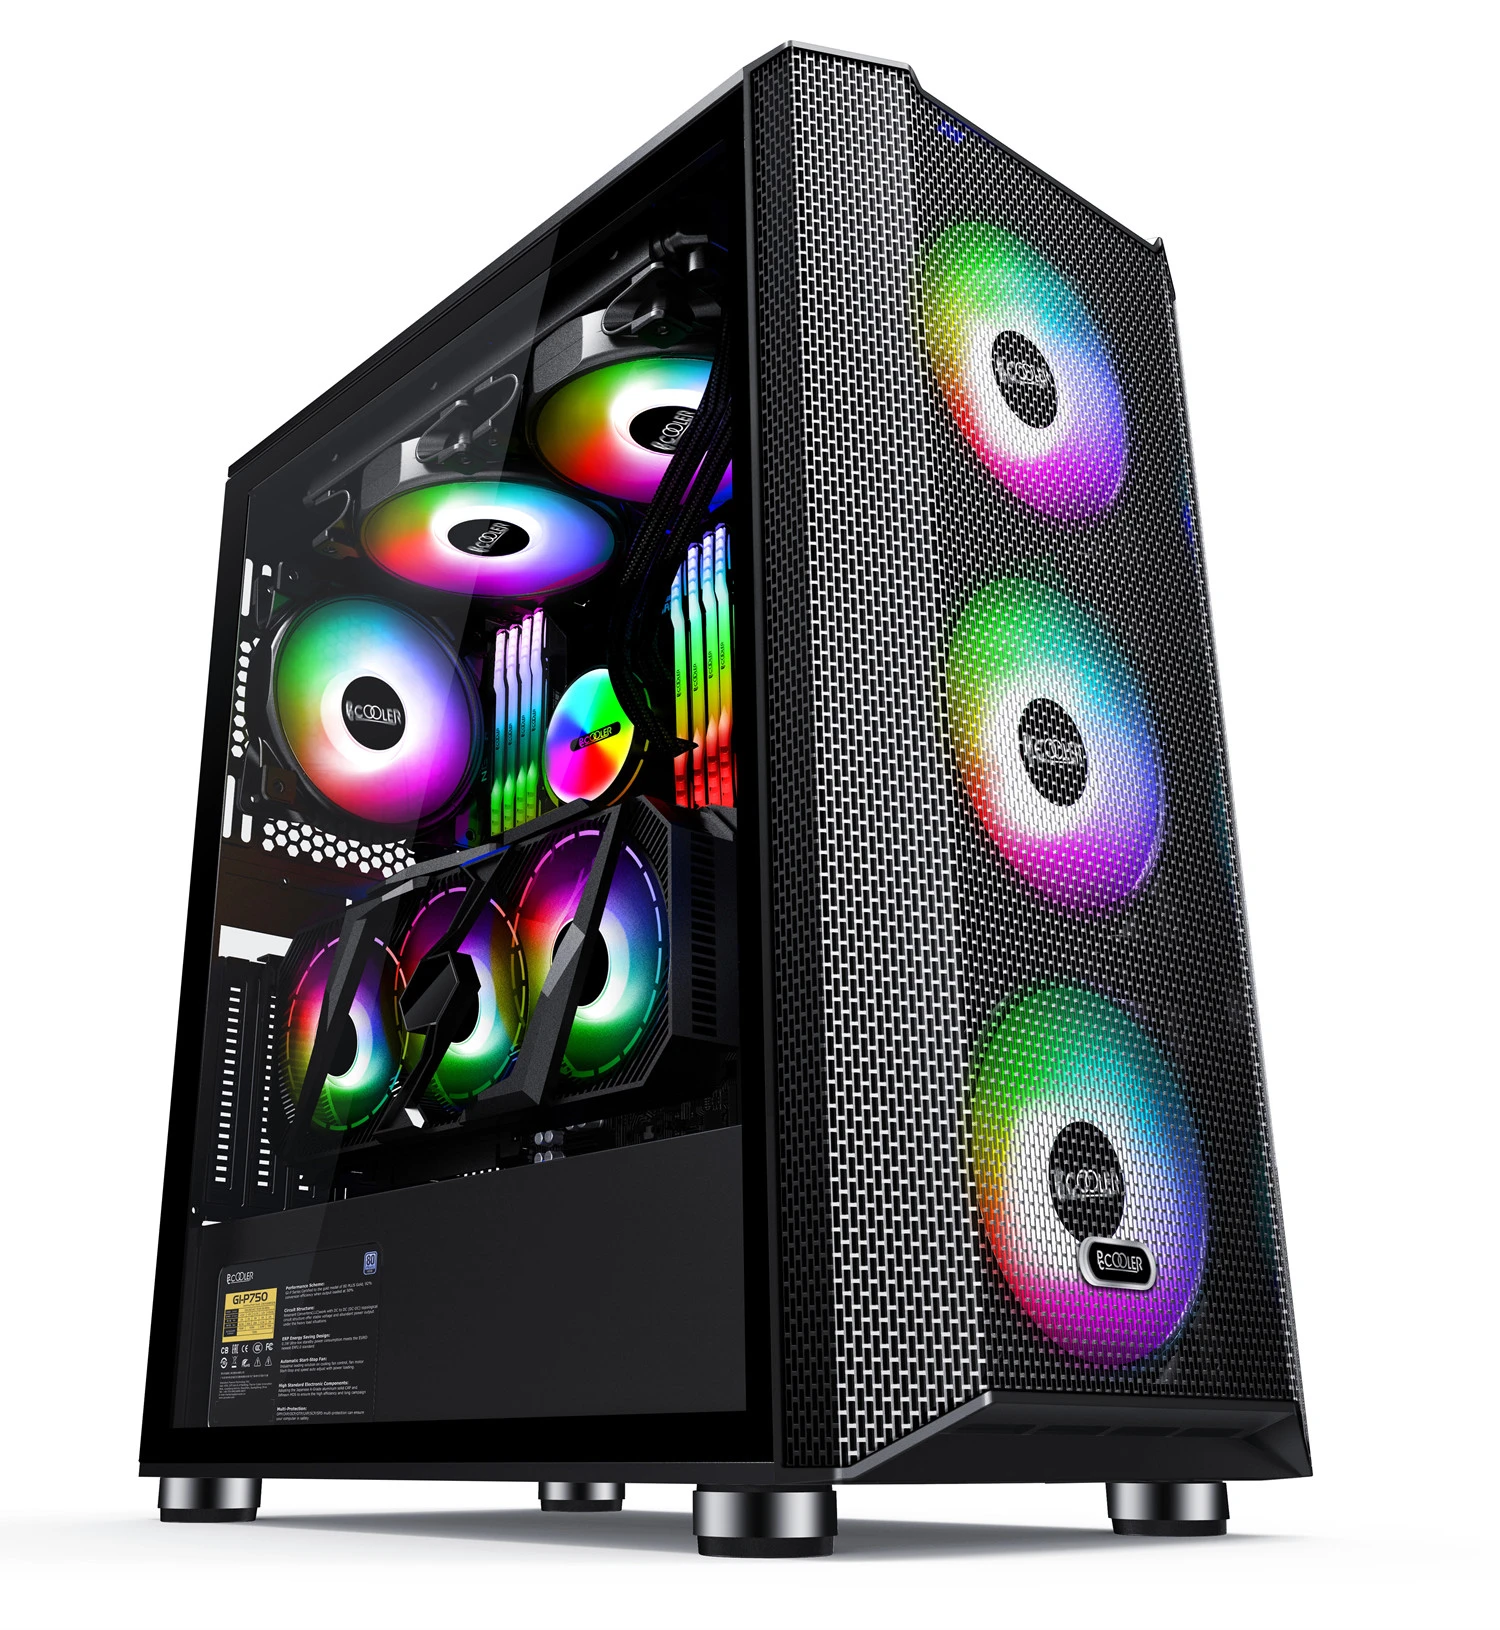 PCCOOLER Professional PC Gaming Case support ATX full tower computer accessories